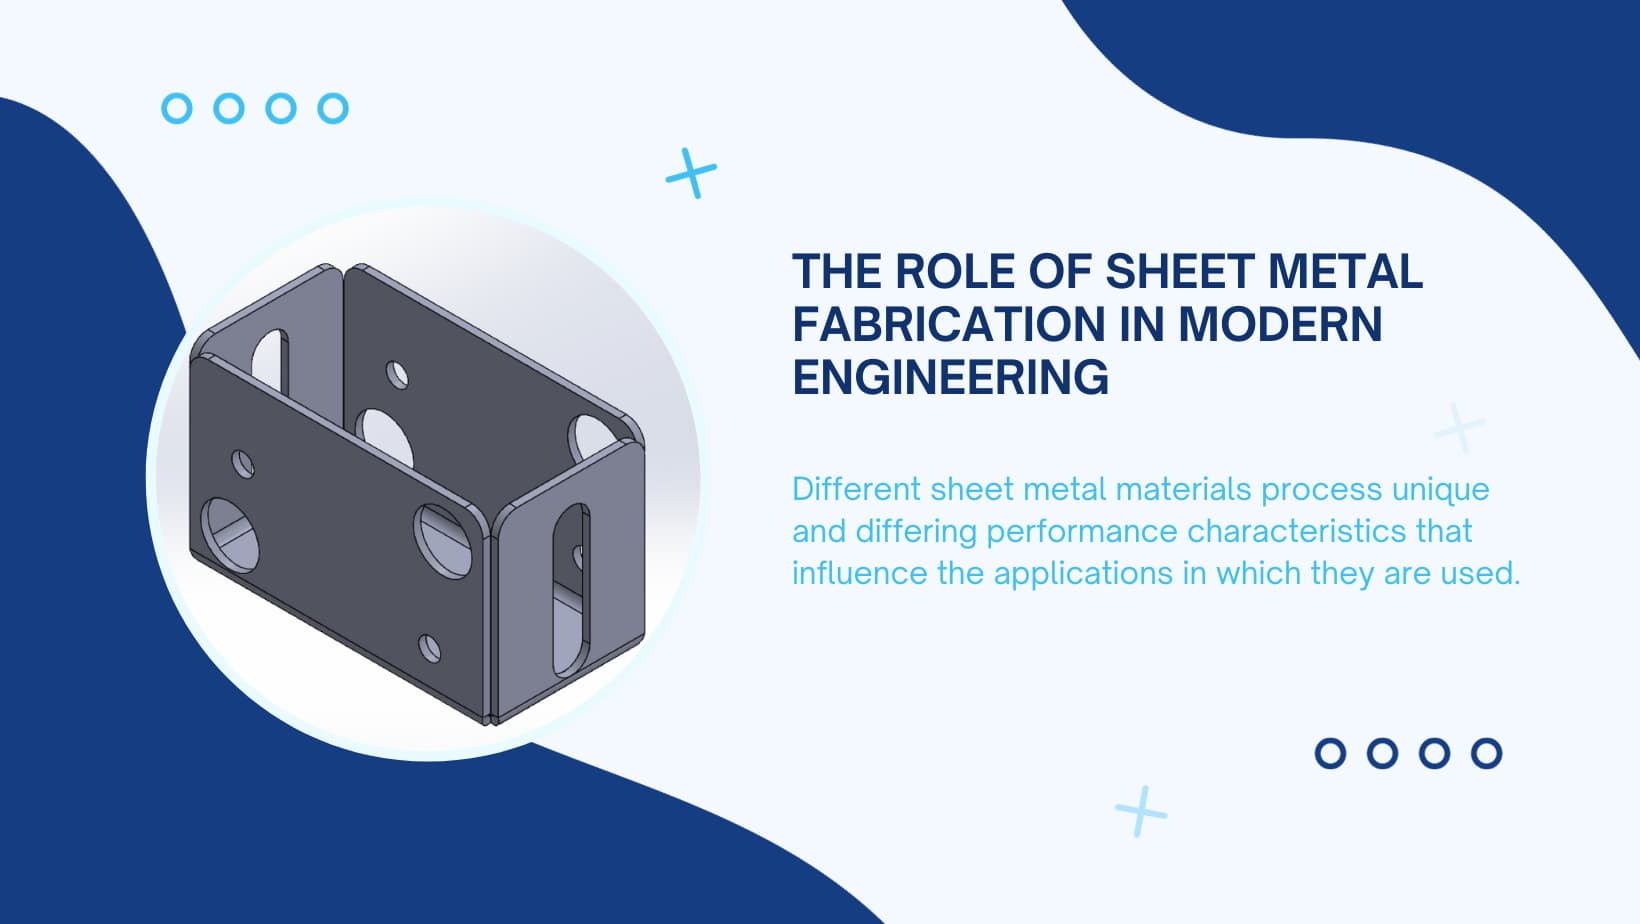 The role of sheet metal fabrication in modern engineering.